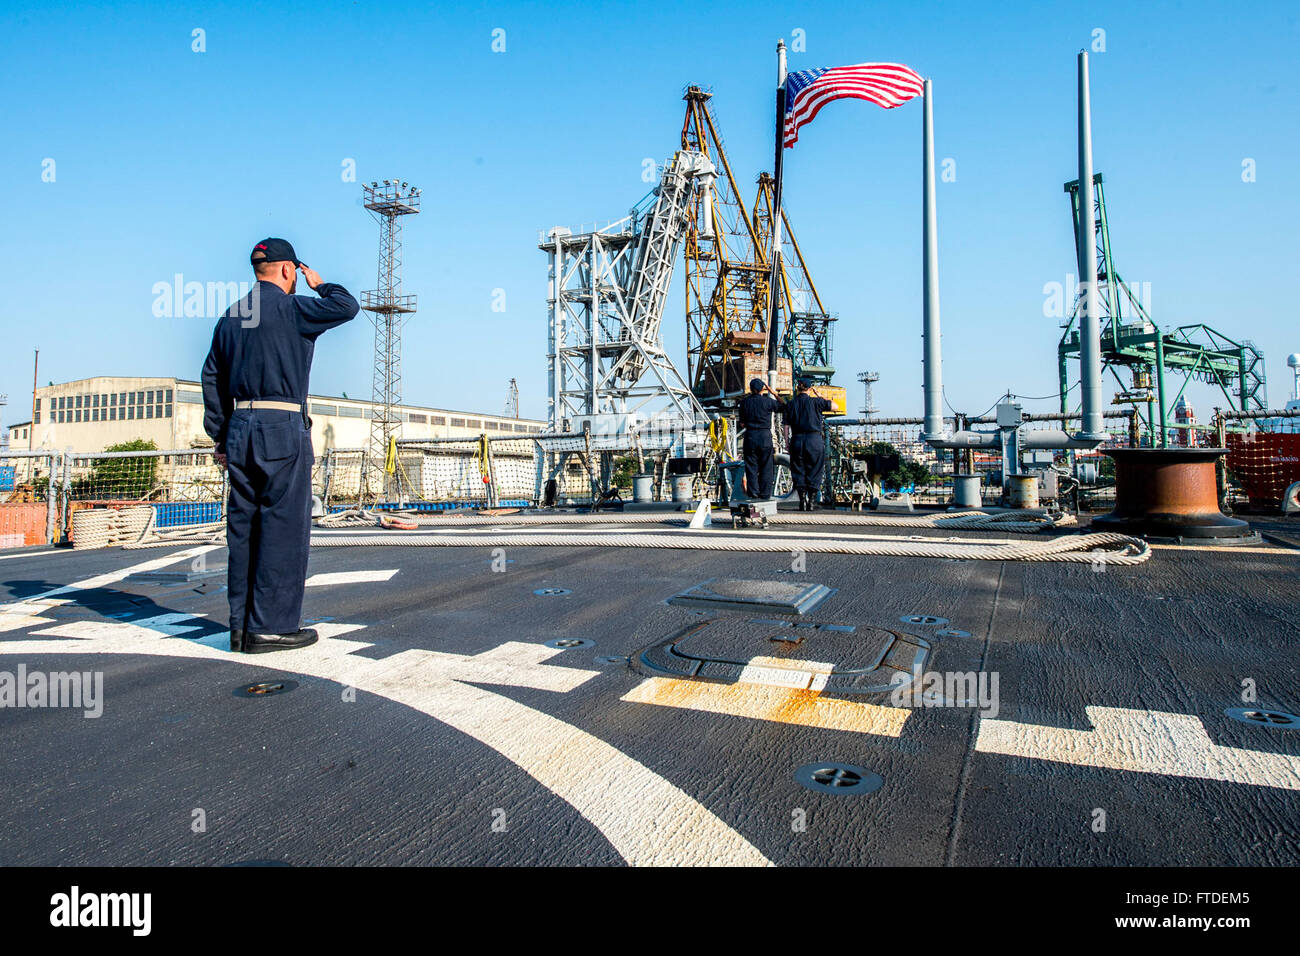 150708-N-EZ054-021 VARNA, Bulgaria (July 8, 2015) Chief Fire Controlman Daniel McCloskey, from Philadelphia, observes morning colors aboard USS Porter (DDG 78) in Varna, Bulgaria, July 8, 2015. Porter, an Arleigh Burke-class guided missile destroyer, forward-deployed to Rota, Spain, is on a routine patrol conducting naval operations in the U.S. 6th Fleet area of operations in support of U.S. national security interests in Europe. (U.S. Navy photo by Mass Communication Specialist 2nd Class Luis R. Chavez Jr/Released) Stock Photo